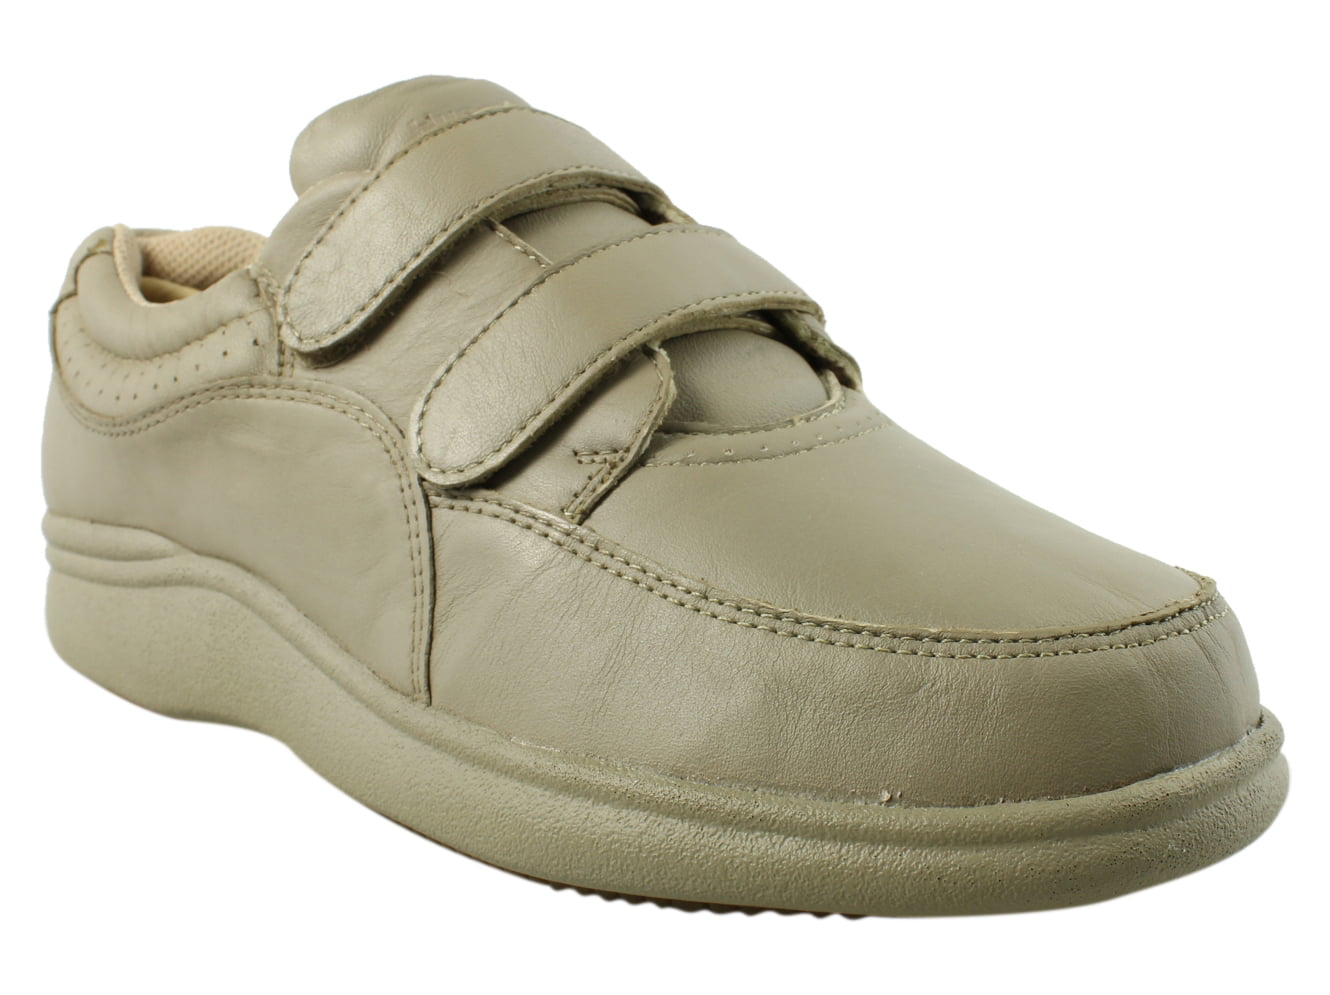 Hush Puppies Ladies Shoes : Hush Puppies Women's Shoes - Latest Shoes ...